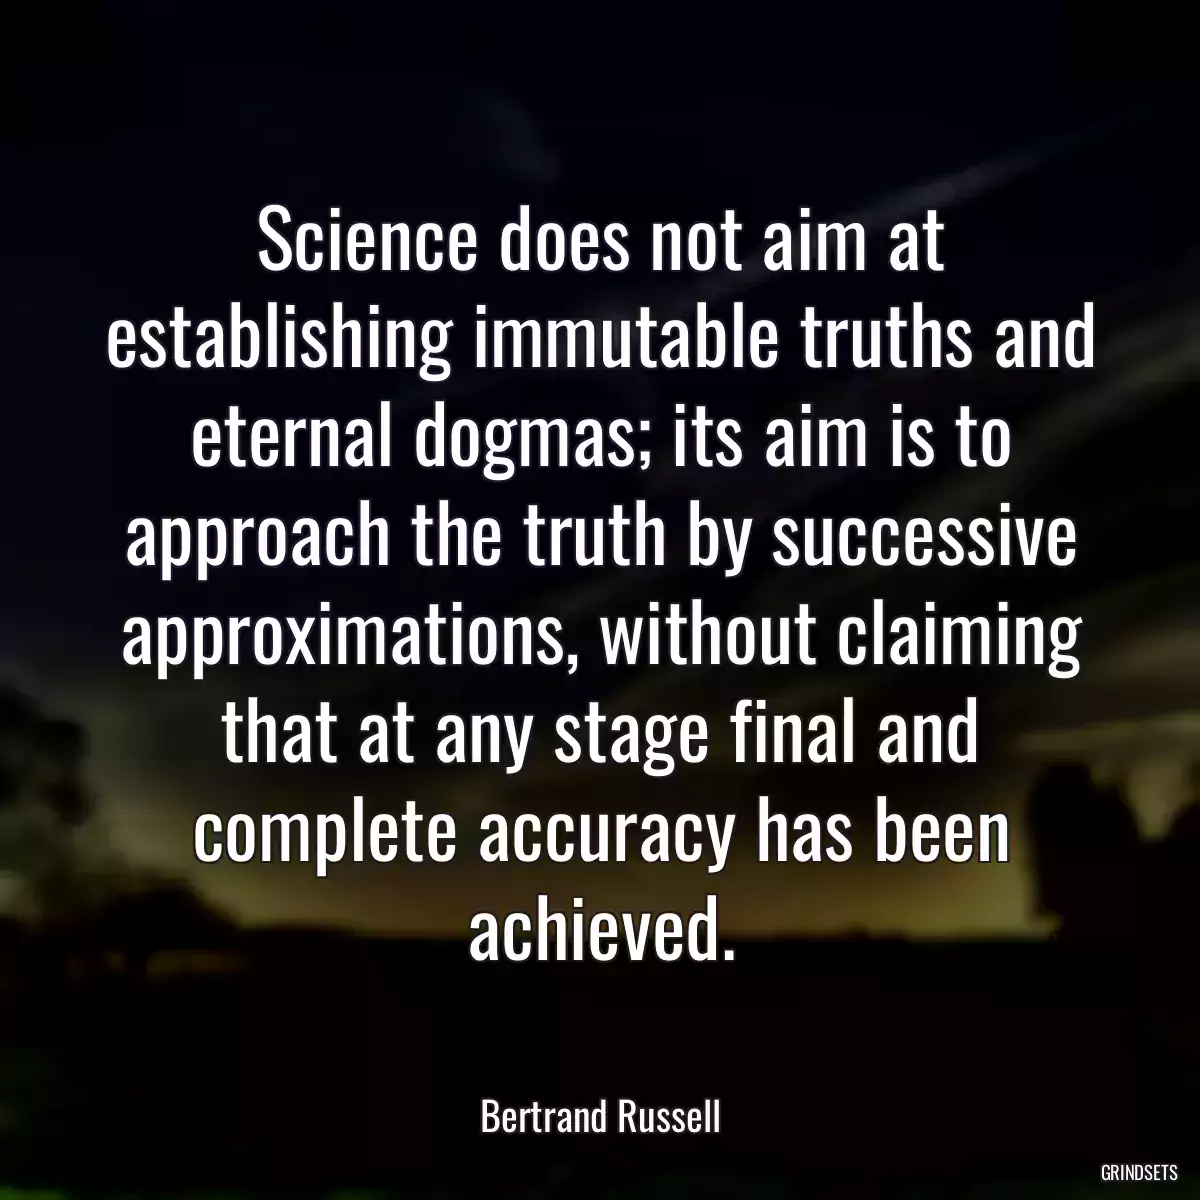 Science does not aim at establishing immutable truths and eternal dogmas; its aim is to approach the truth by successive approximations, without claiming that at any stage final and complete accuracy has been achieved.